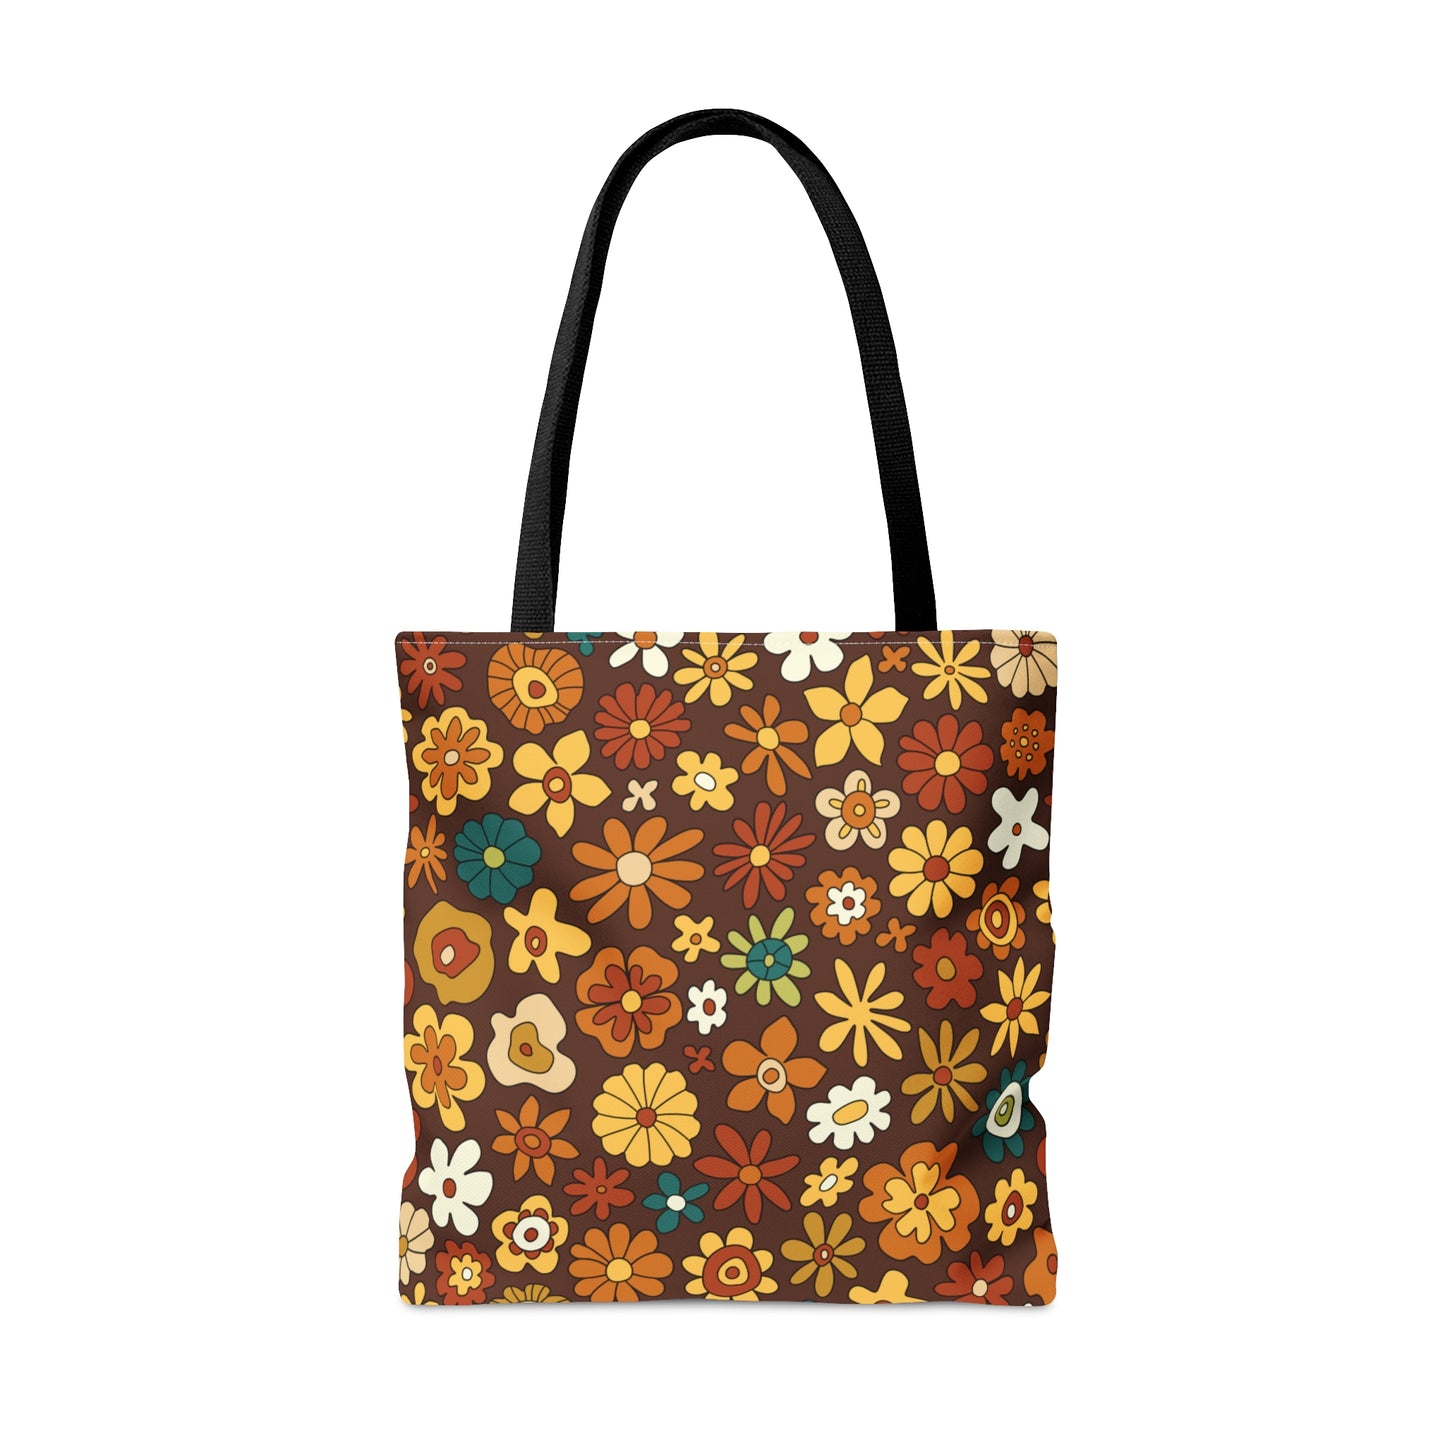 Retro 60s 70s Groovy Floral Mid Century Modern Brown Tote Bag